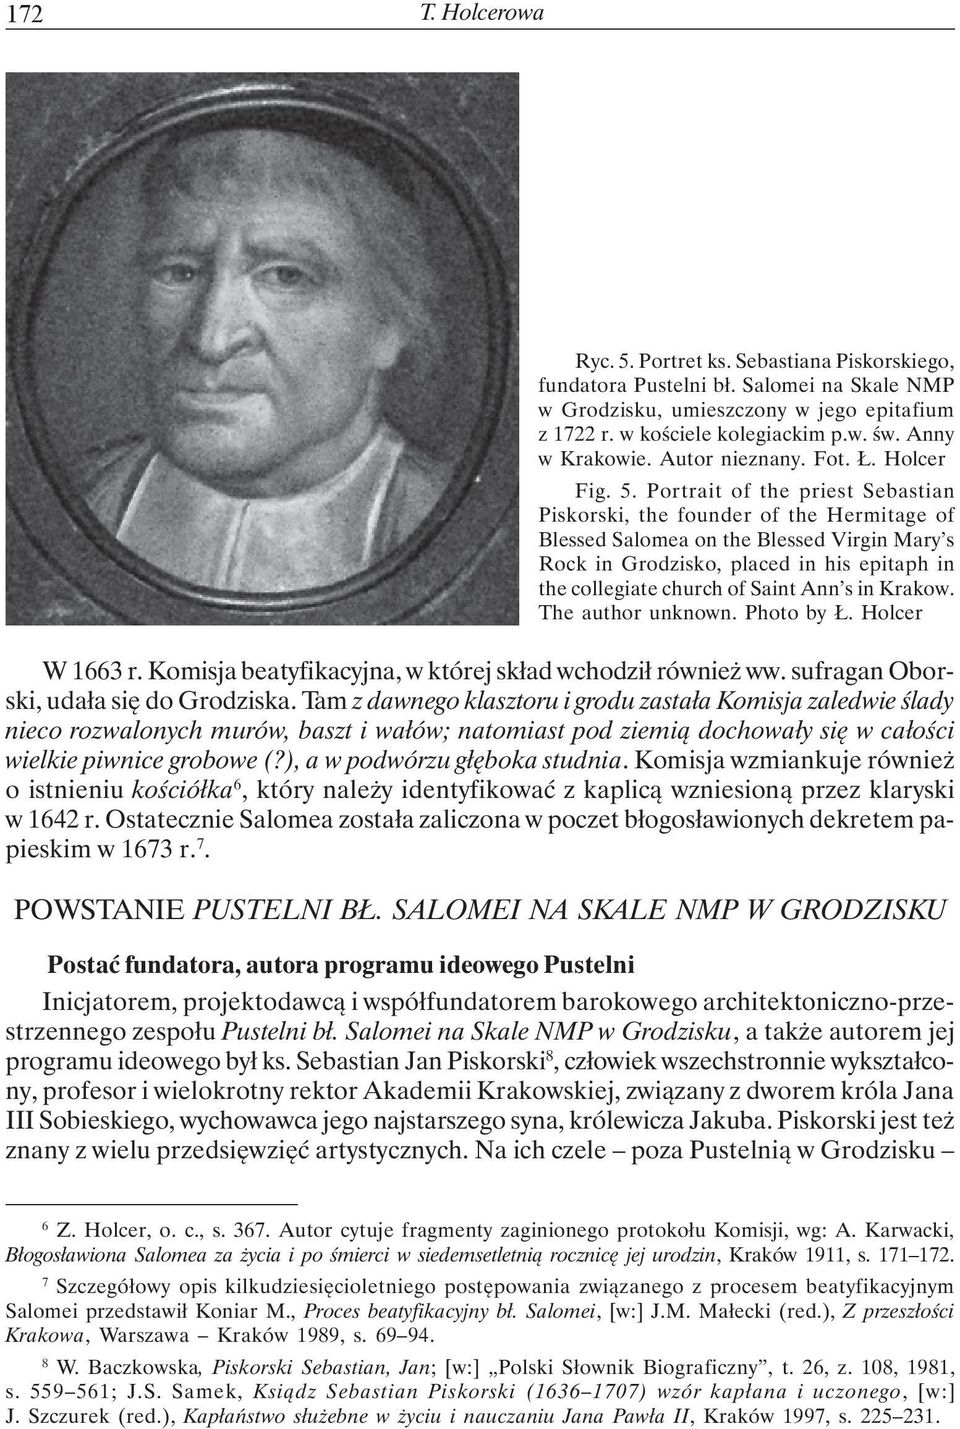 Portrait of the priest Sebastian Piskorski, the founder of the Hermitage of Blessed Salomea on the Blessed Virgin Mary s Rock in Grodzisko, placed in his epitaph in the collegiate church of Saint Ann